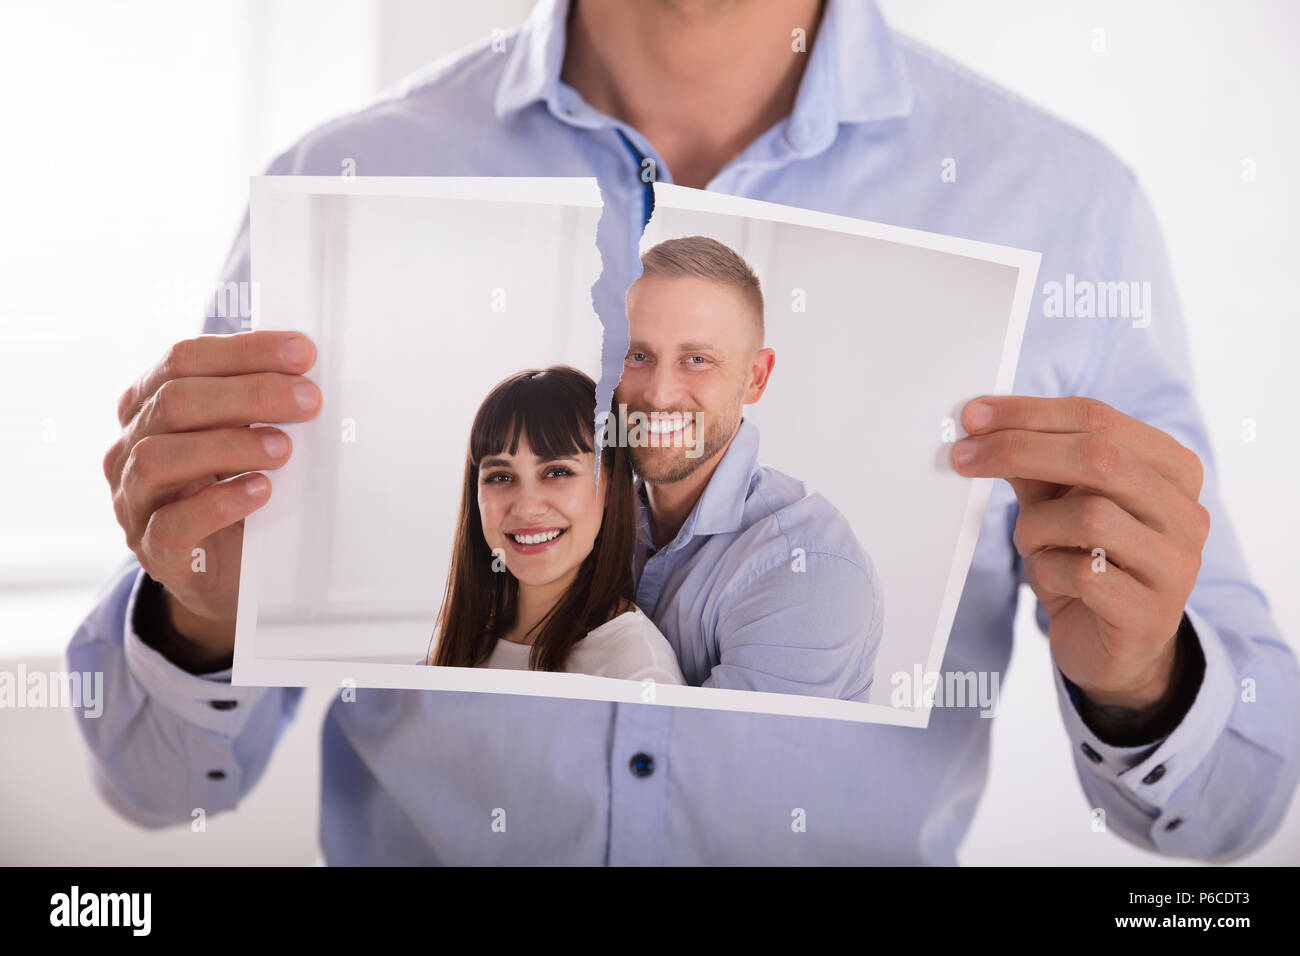 Close-up Of A Man's Hand Tearing Photo Of Smiling Couple In Two Pieces Stock Photo